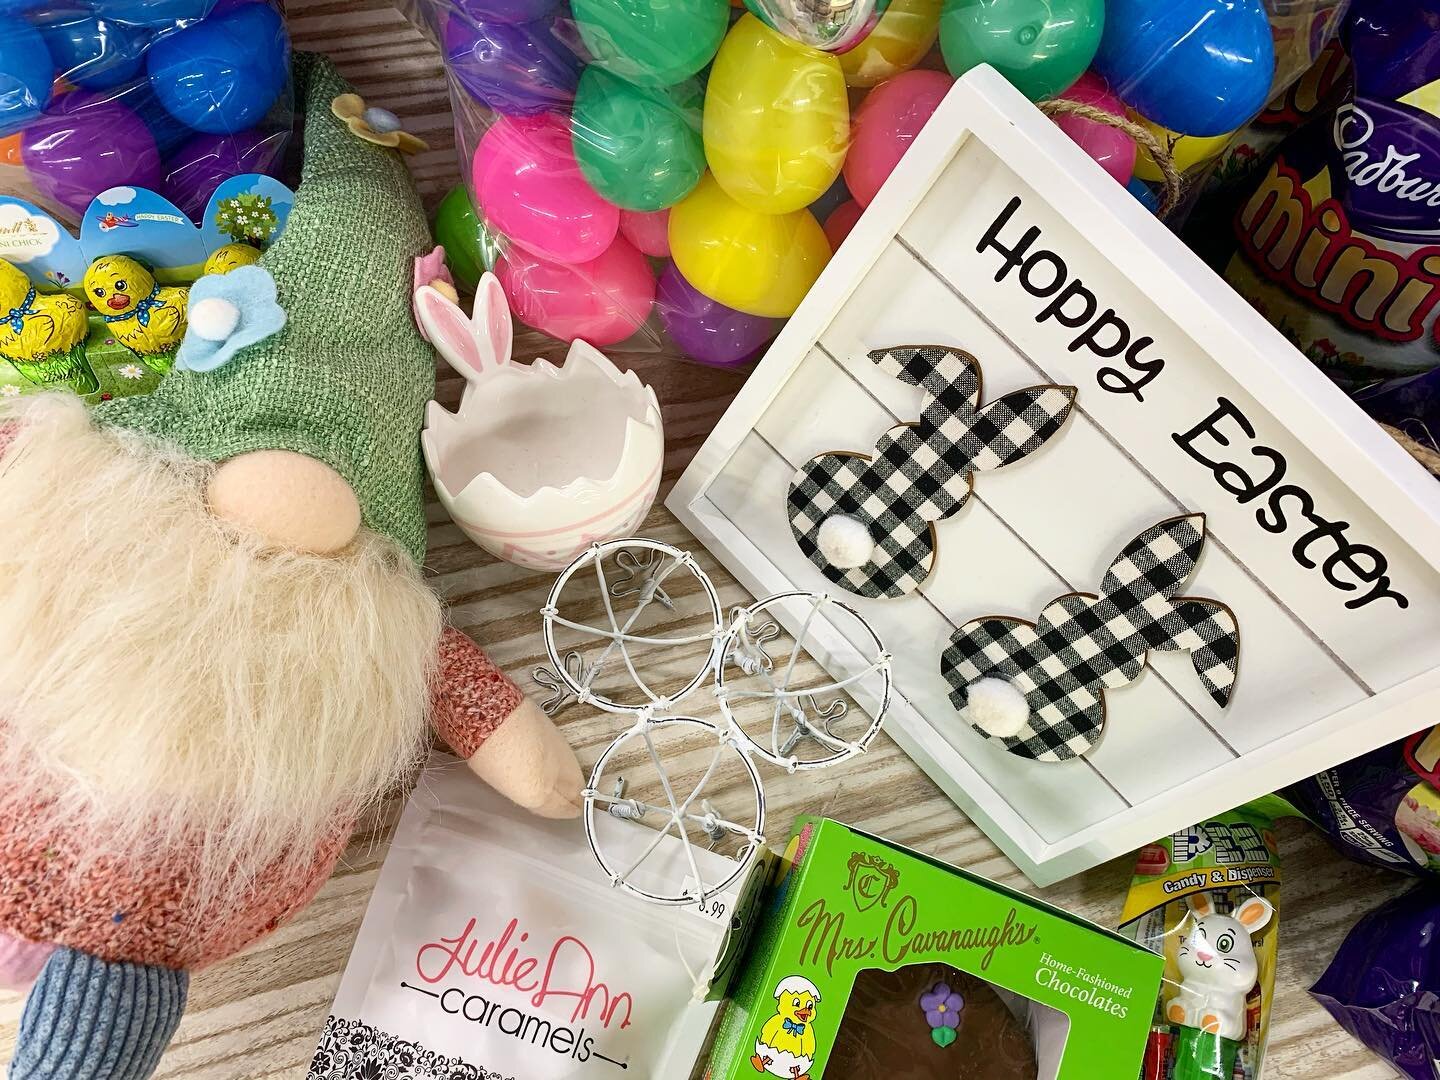 Give yourself and family an #Easter to remember and...HOP...on into The Store to grab some of the cutest Easter candies and decor around! 🐇
_
#easter #easterdecor #easterbasket #eastereggs #Chocolates #locallove #Supportlocal #TheStore #Holladay